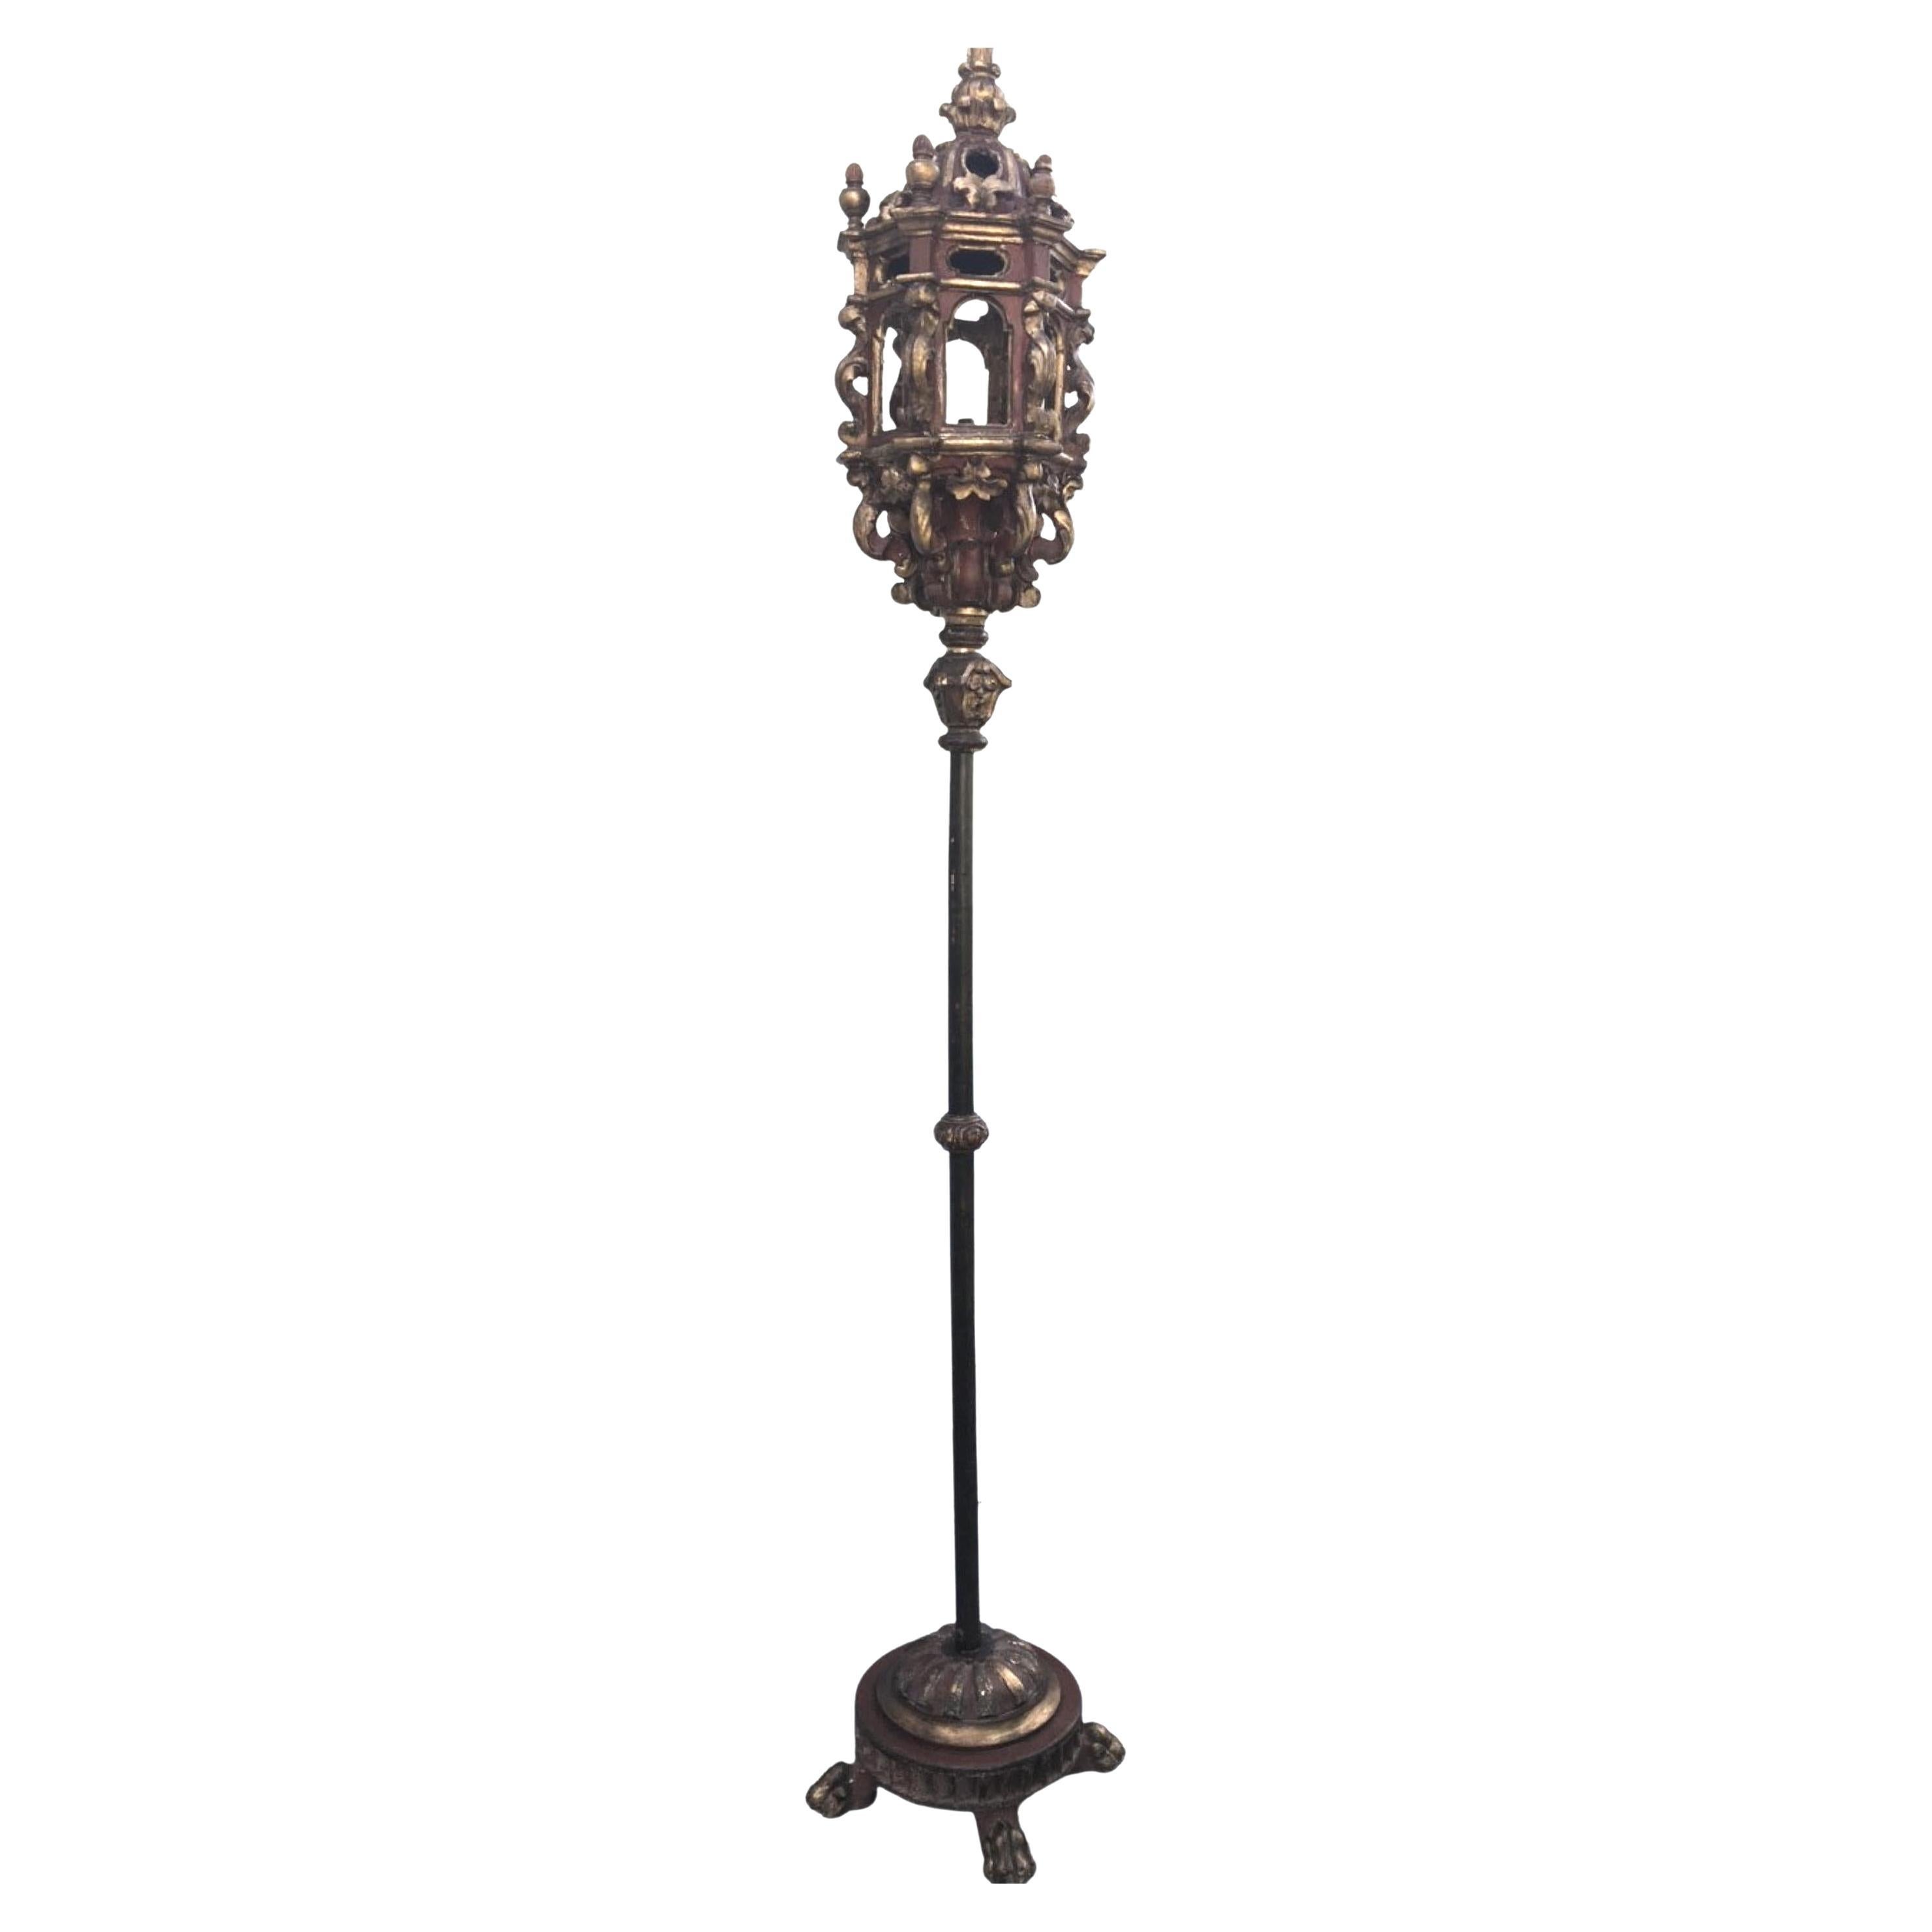 17th Century Large Six Sided Venetian Carved Gilded Baroque Hall Lantern For Sale